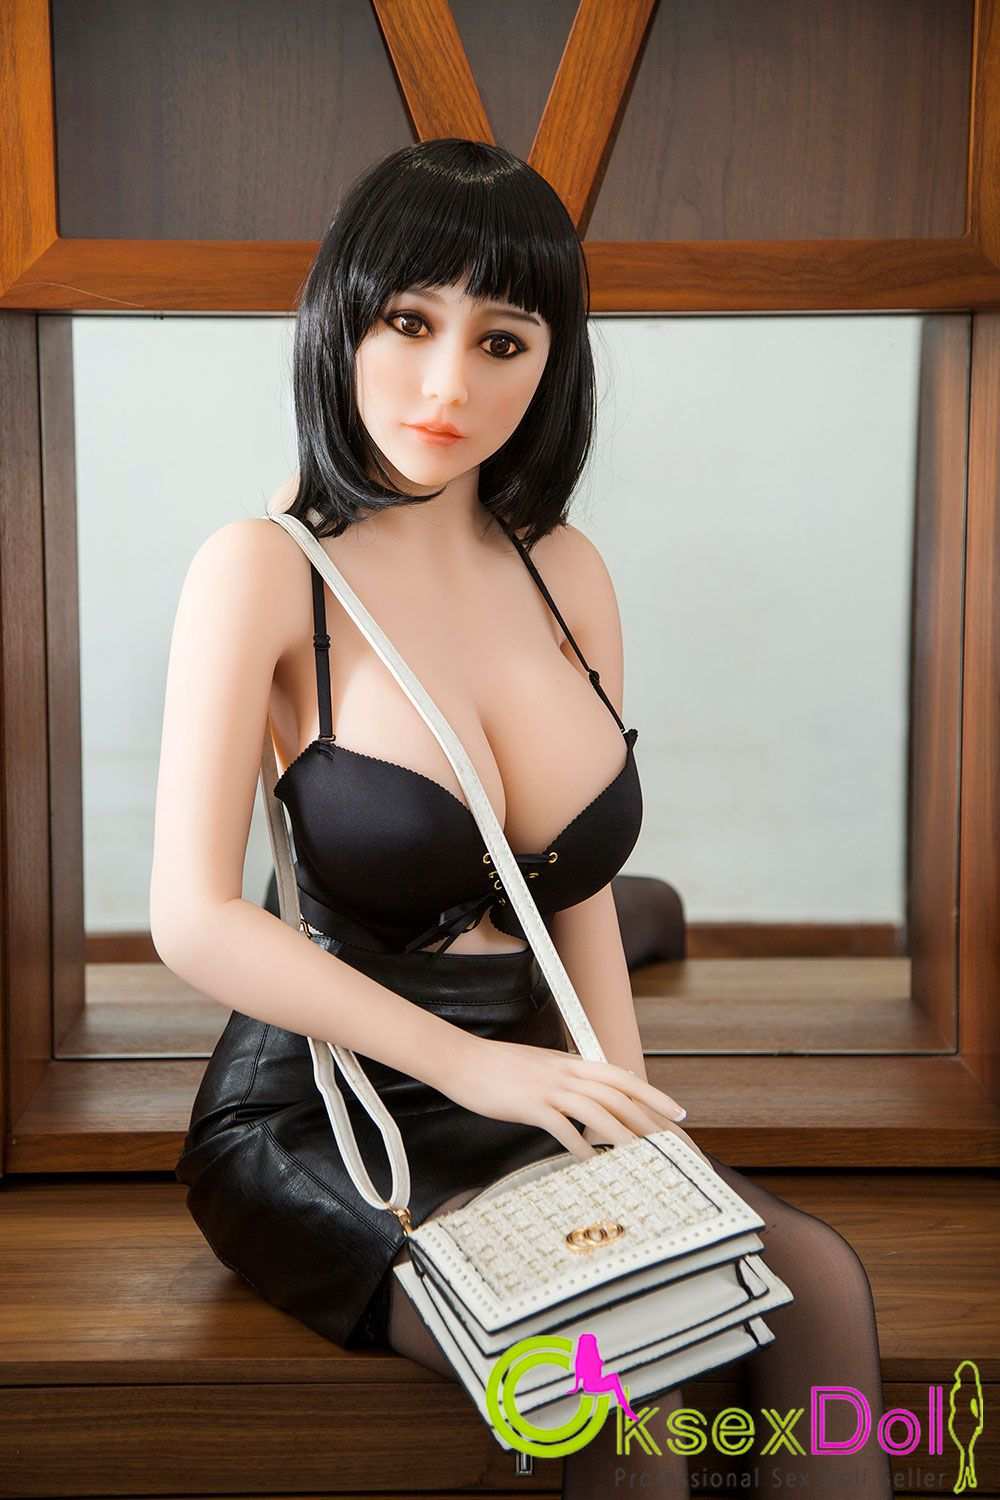 FIRE Brand 156cm H Cup Asian Big Breast Sex Doll『Braylee』